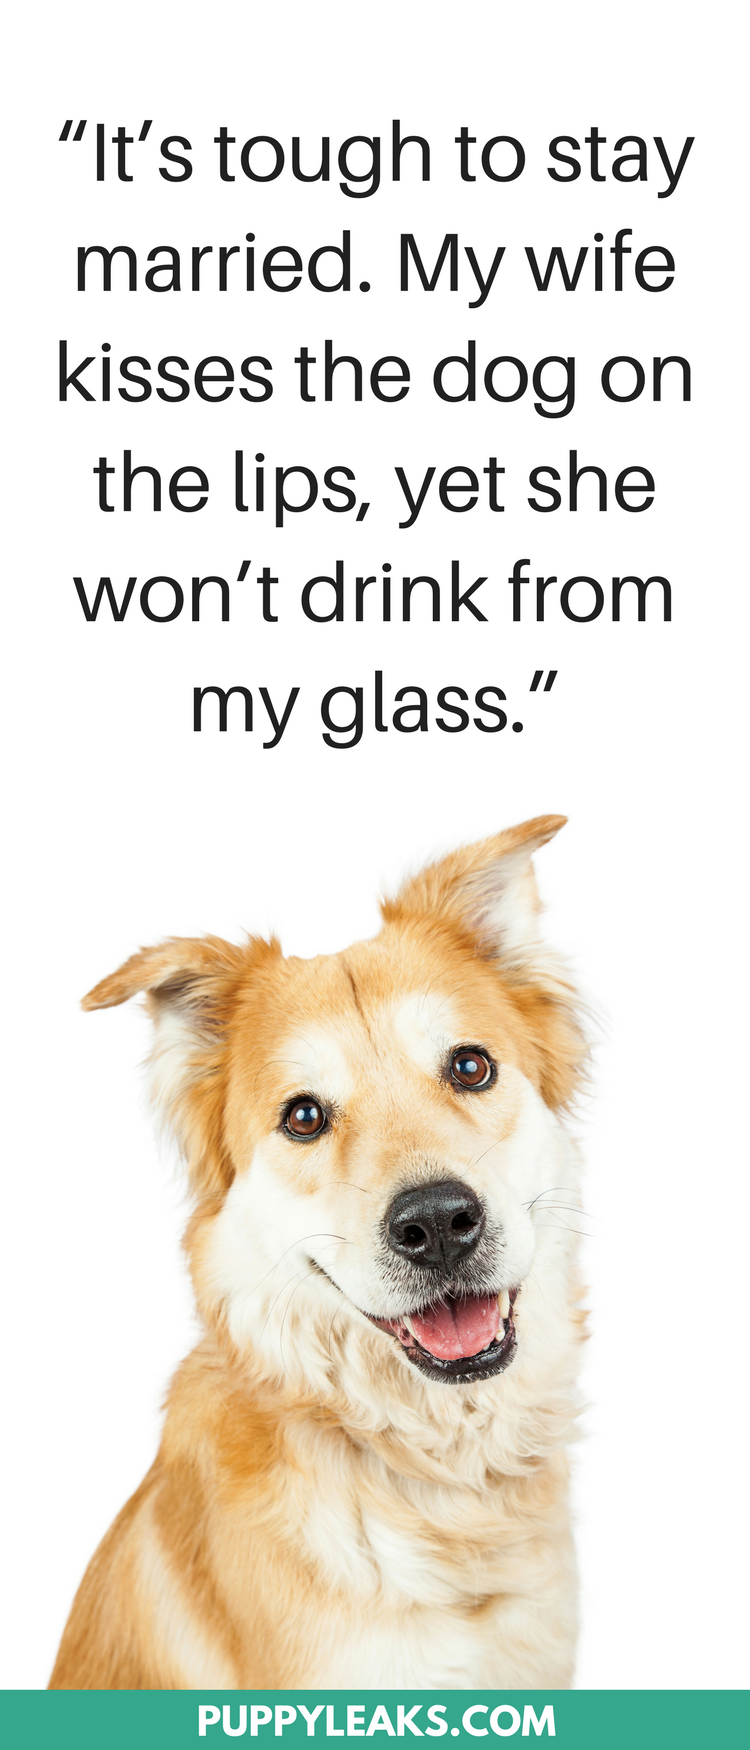 funny quotes about dogs